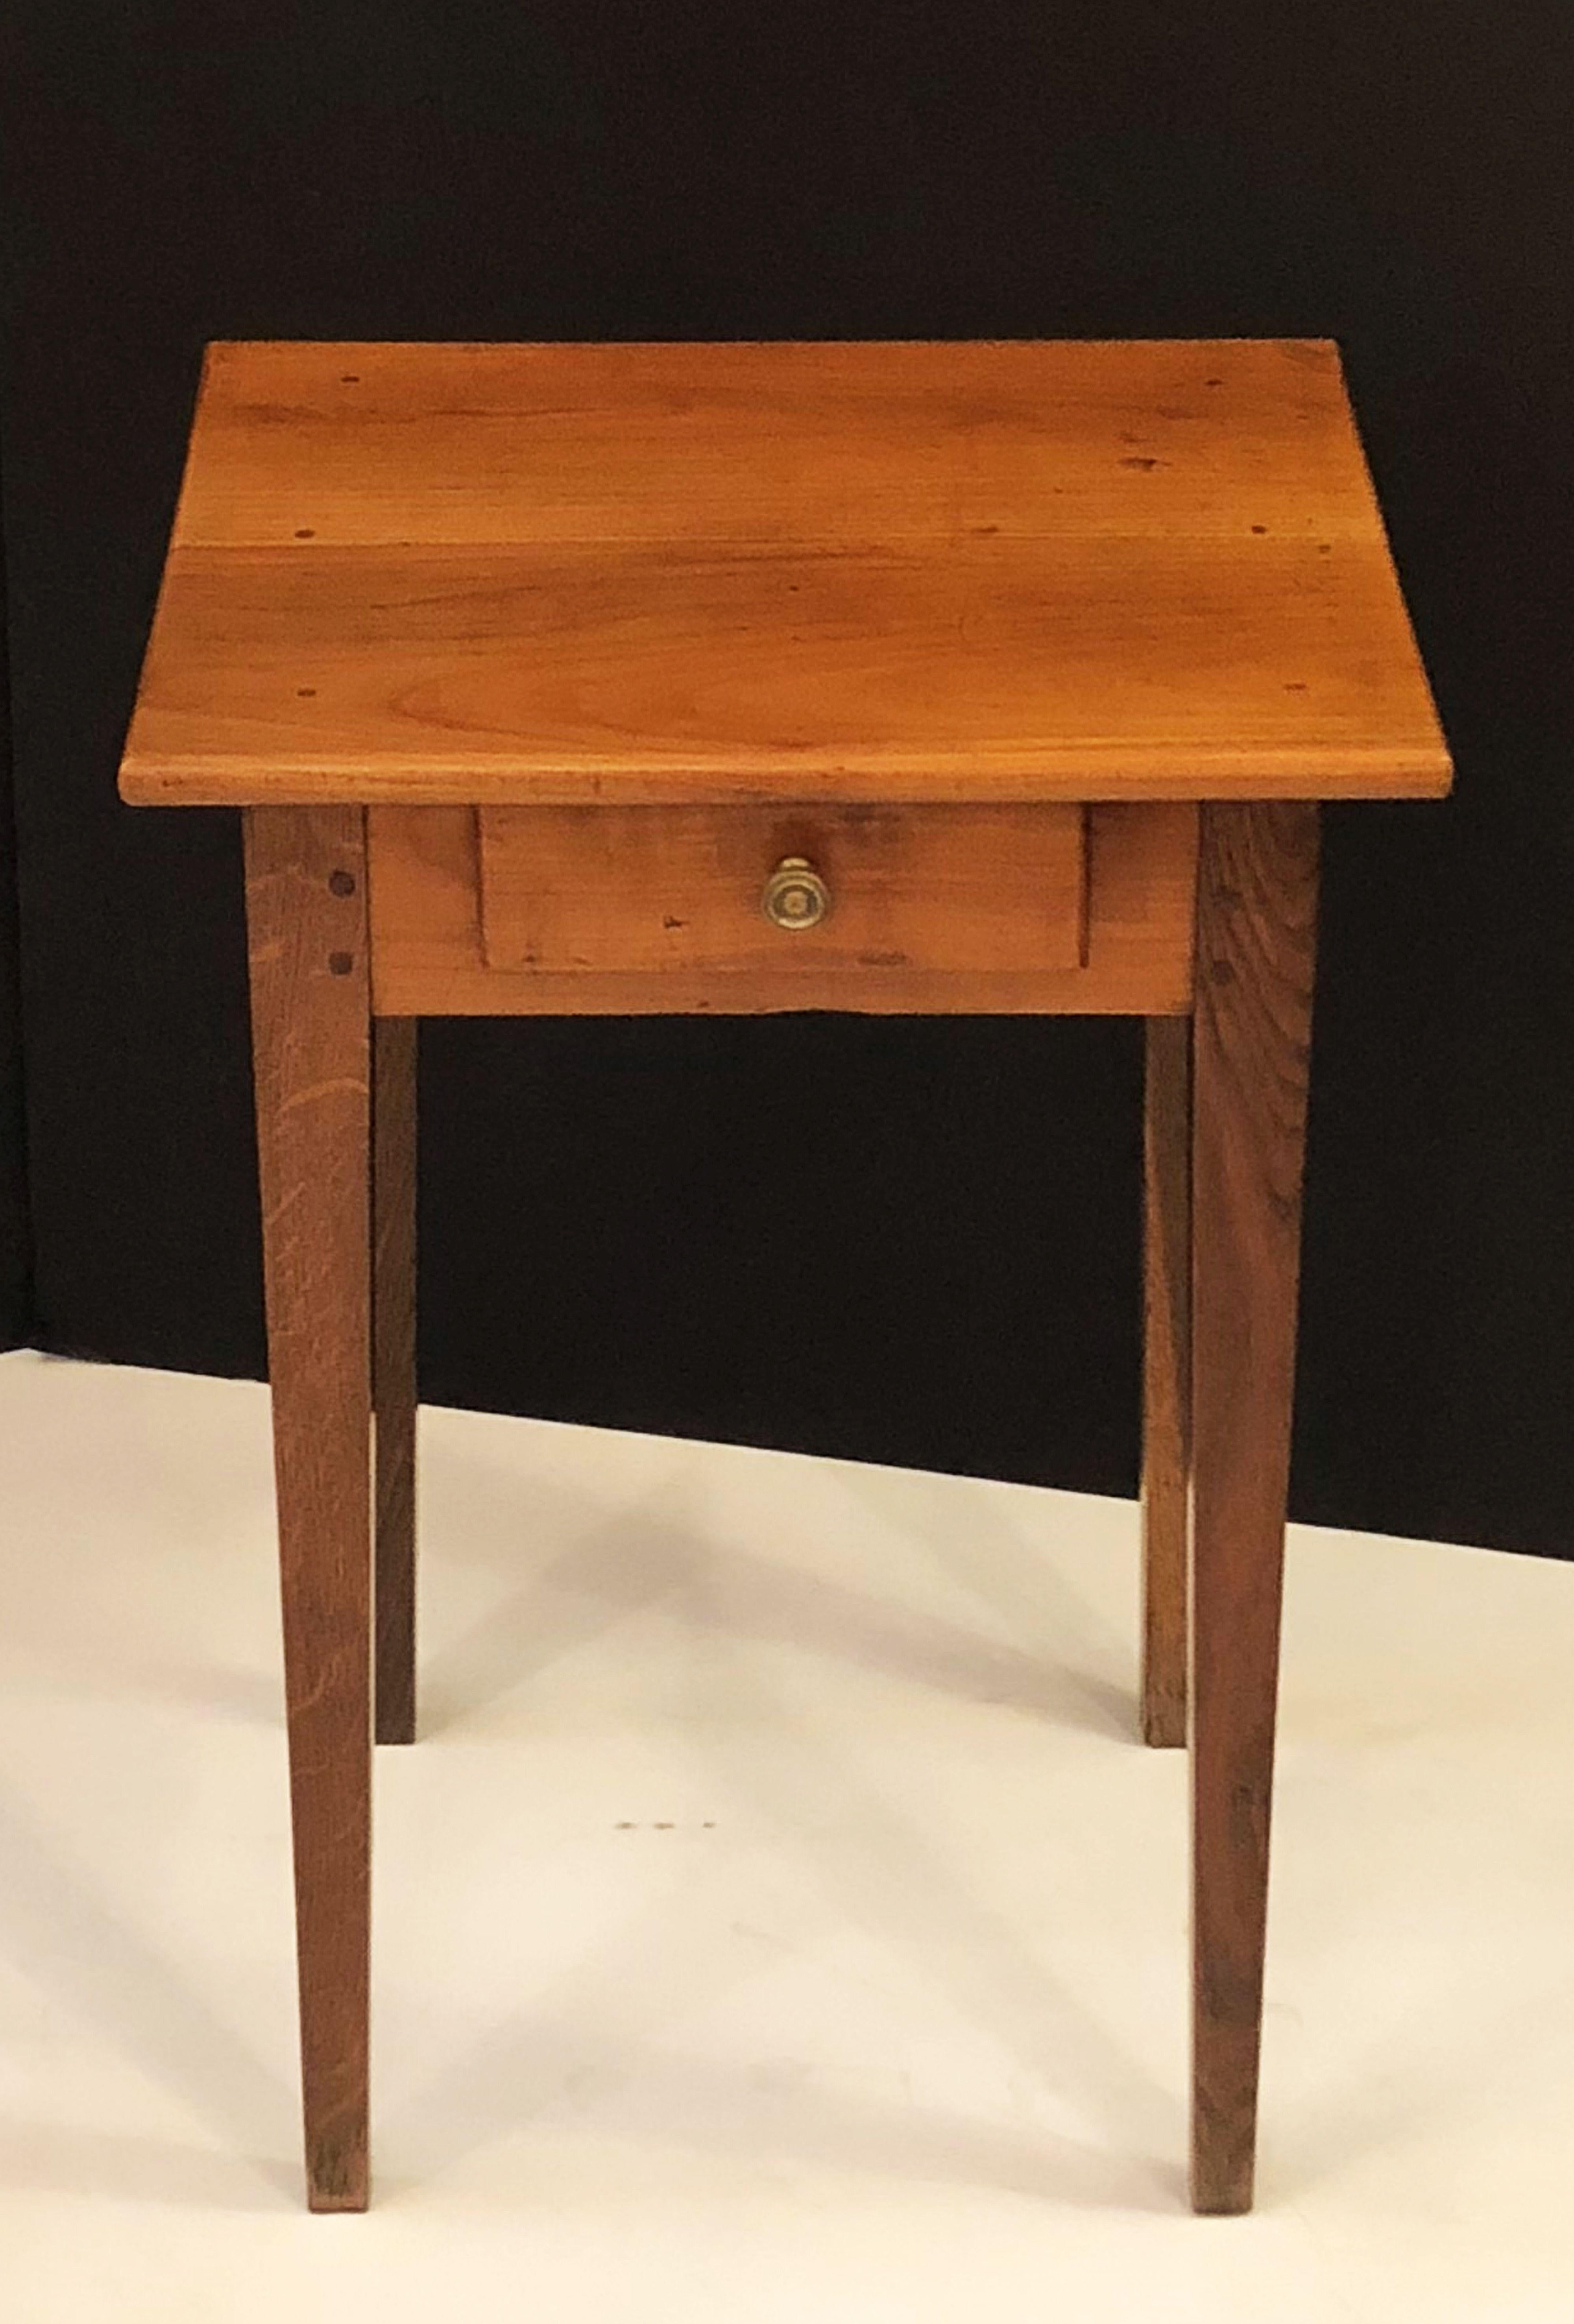 A fine French side table or writing table of cherry and oak, featuring a rectangular top over a frieze with drawer and brass knob pull, resting on tapered legs.

Dimensions: H 28 1/2 inches x W 20 inches x D 16 inches

Makes a great bedside